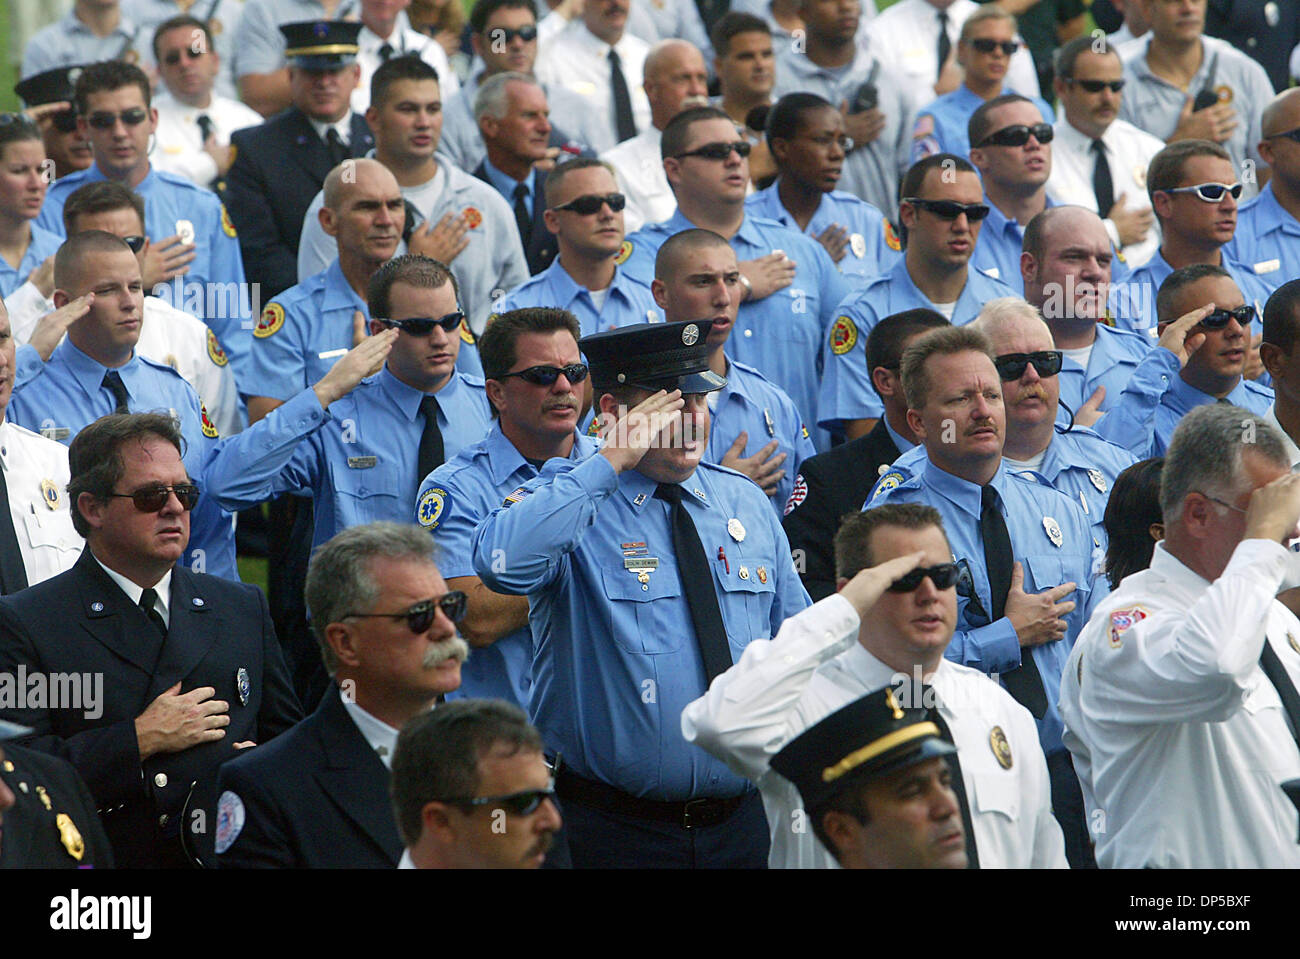 Sep 11, 2006; West Palm Beach, FL, USA; Emergency rescue officials salute during memorial held at the Meyer Amphitheater Monday morning.  Firefighters from across southern Florida joined together at the Meyer Amphitheater to 'never forget' and honor the 343 firefighters who died on September 11, 2001. The event was sponsored by Fire chiefs of Palm Beach County and Palm Beach County Stock Photo